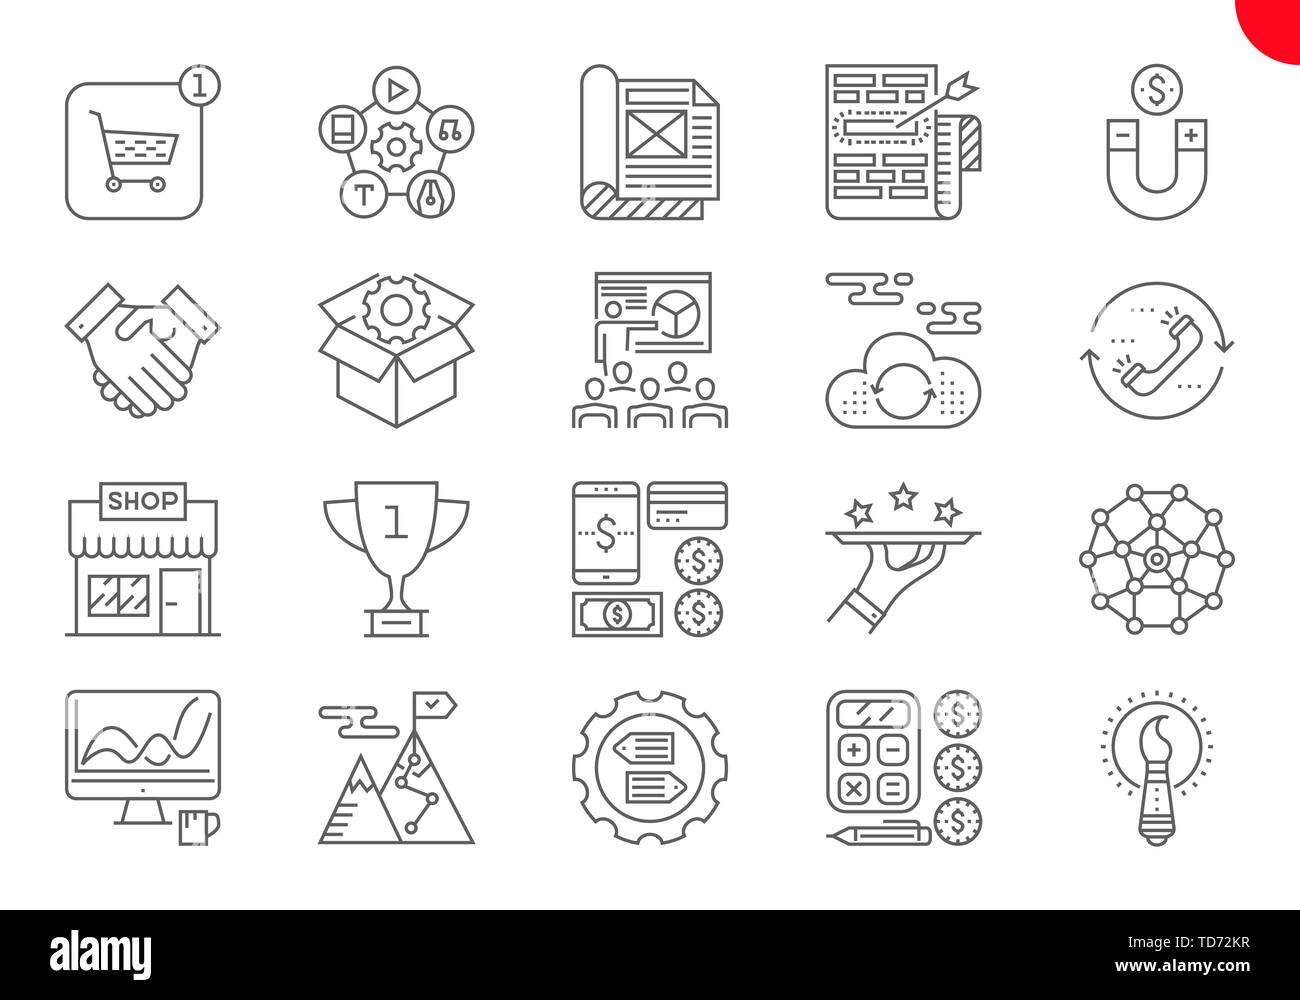 Thin Line Icons Set of Search Engine Optimization Stock Vector